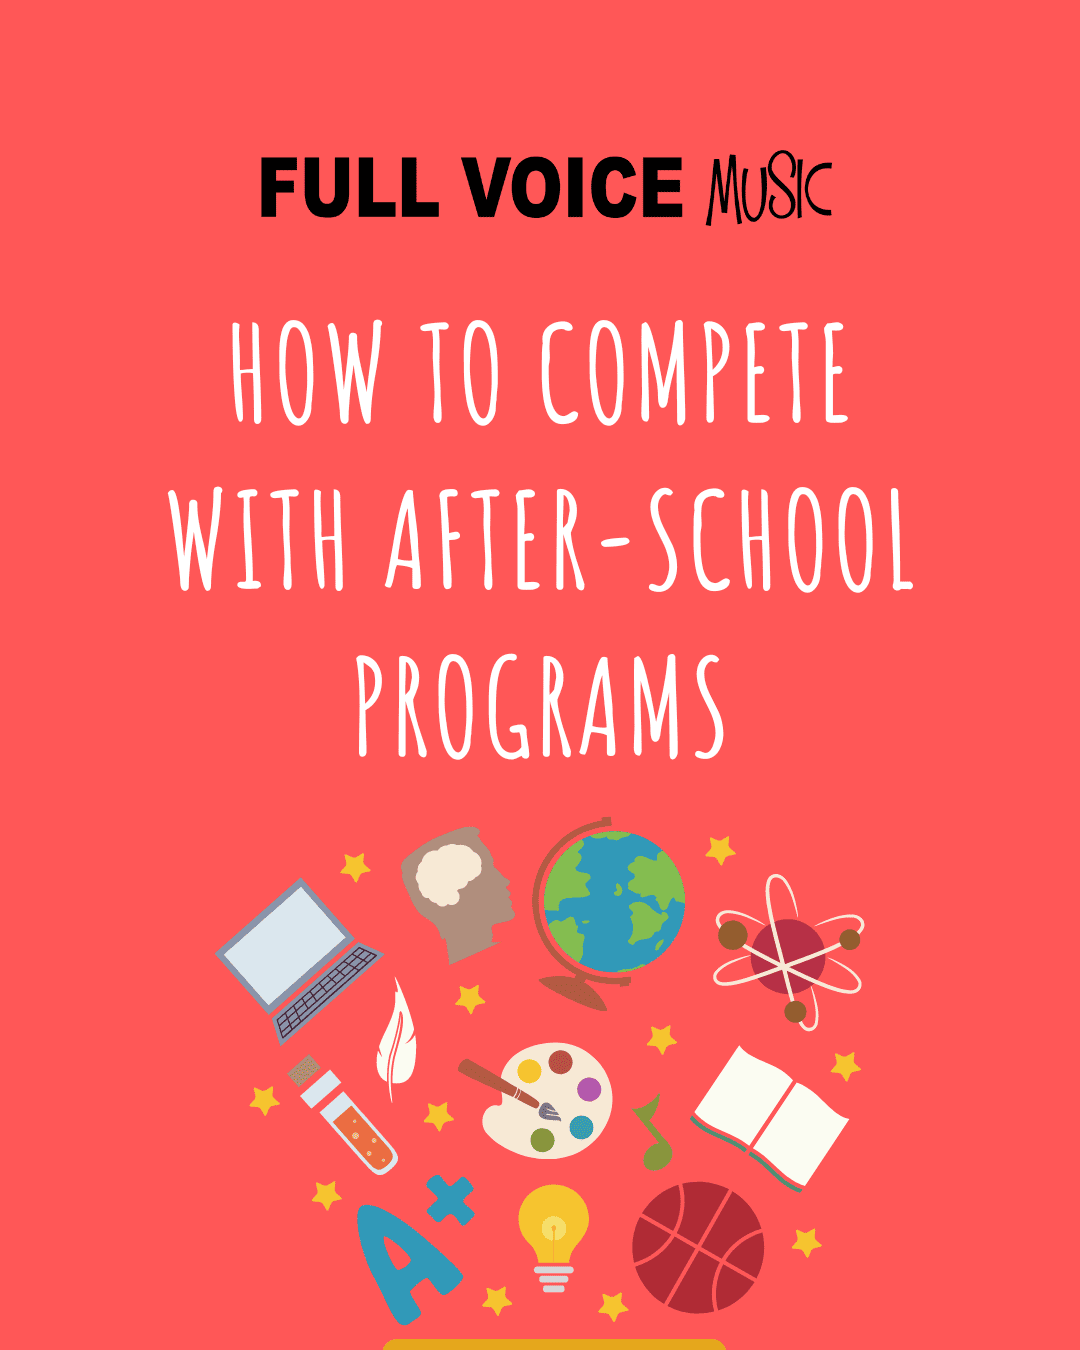 How to compete with after-school programs